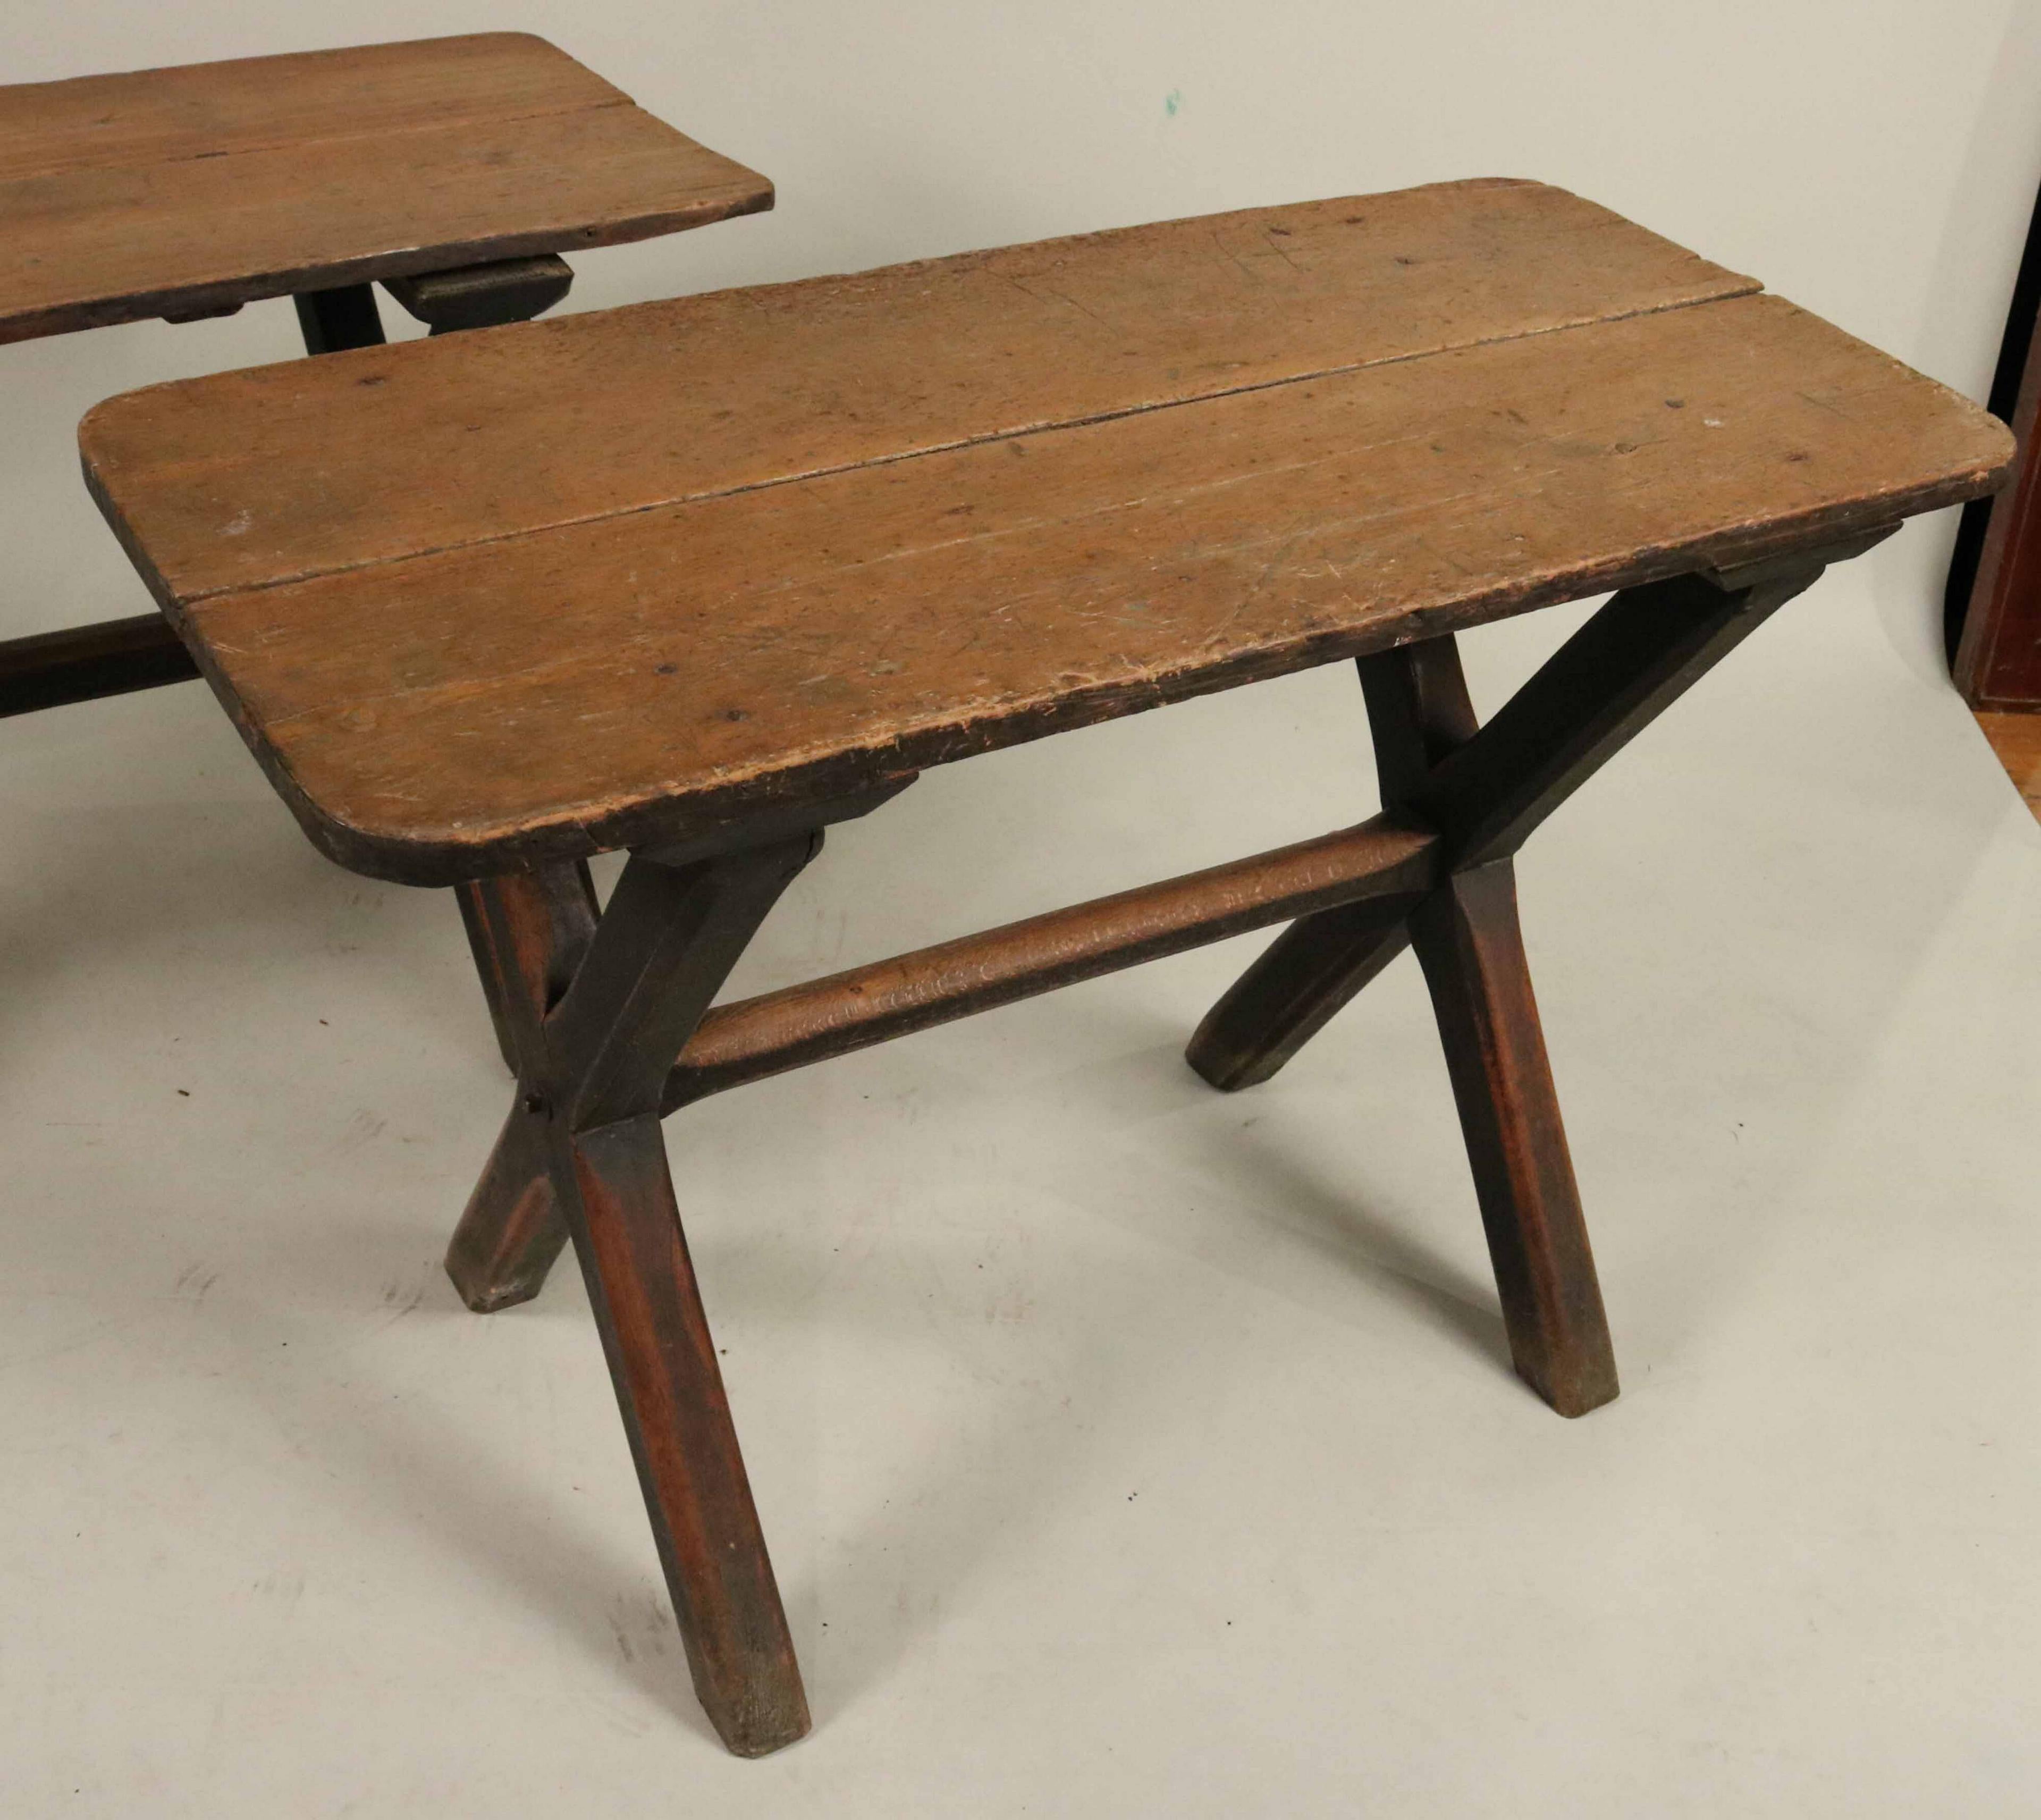 Good quality near pair of early 19th century English pub tables, the scrubbed pine tops over richly patinated 